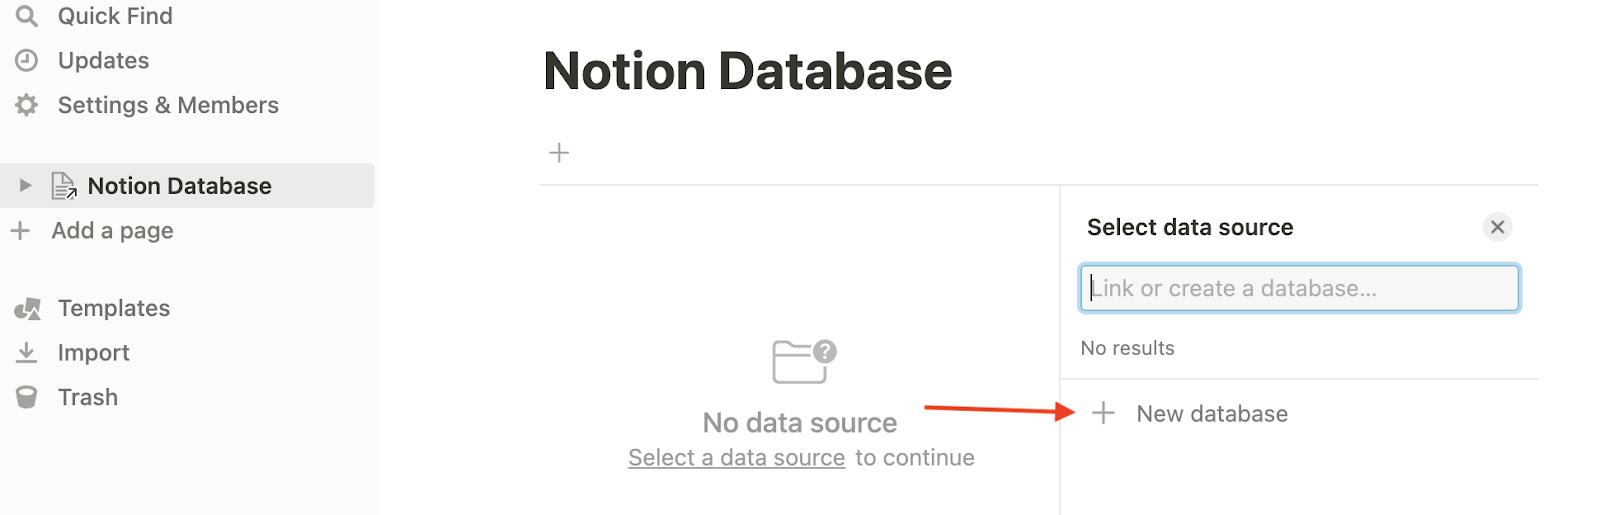 Converting the new default page into a notion database